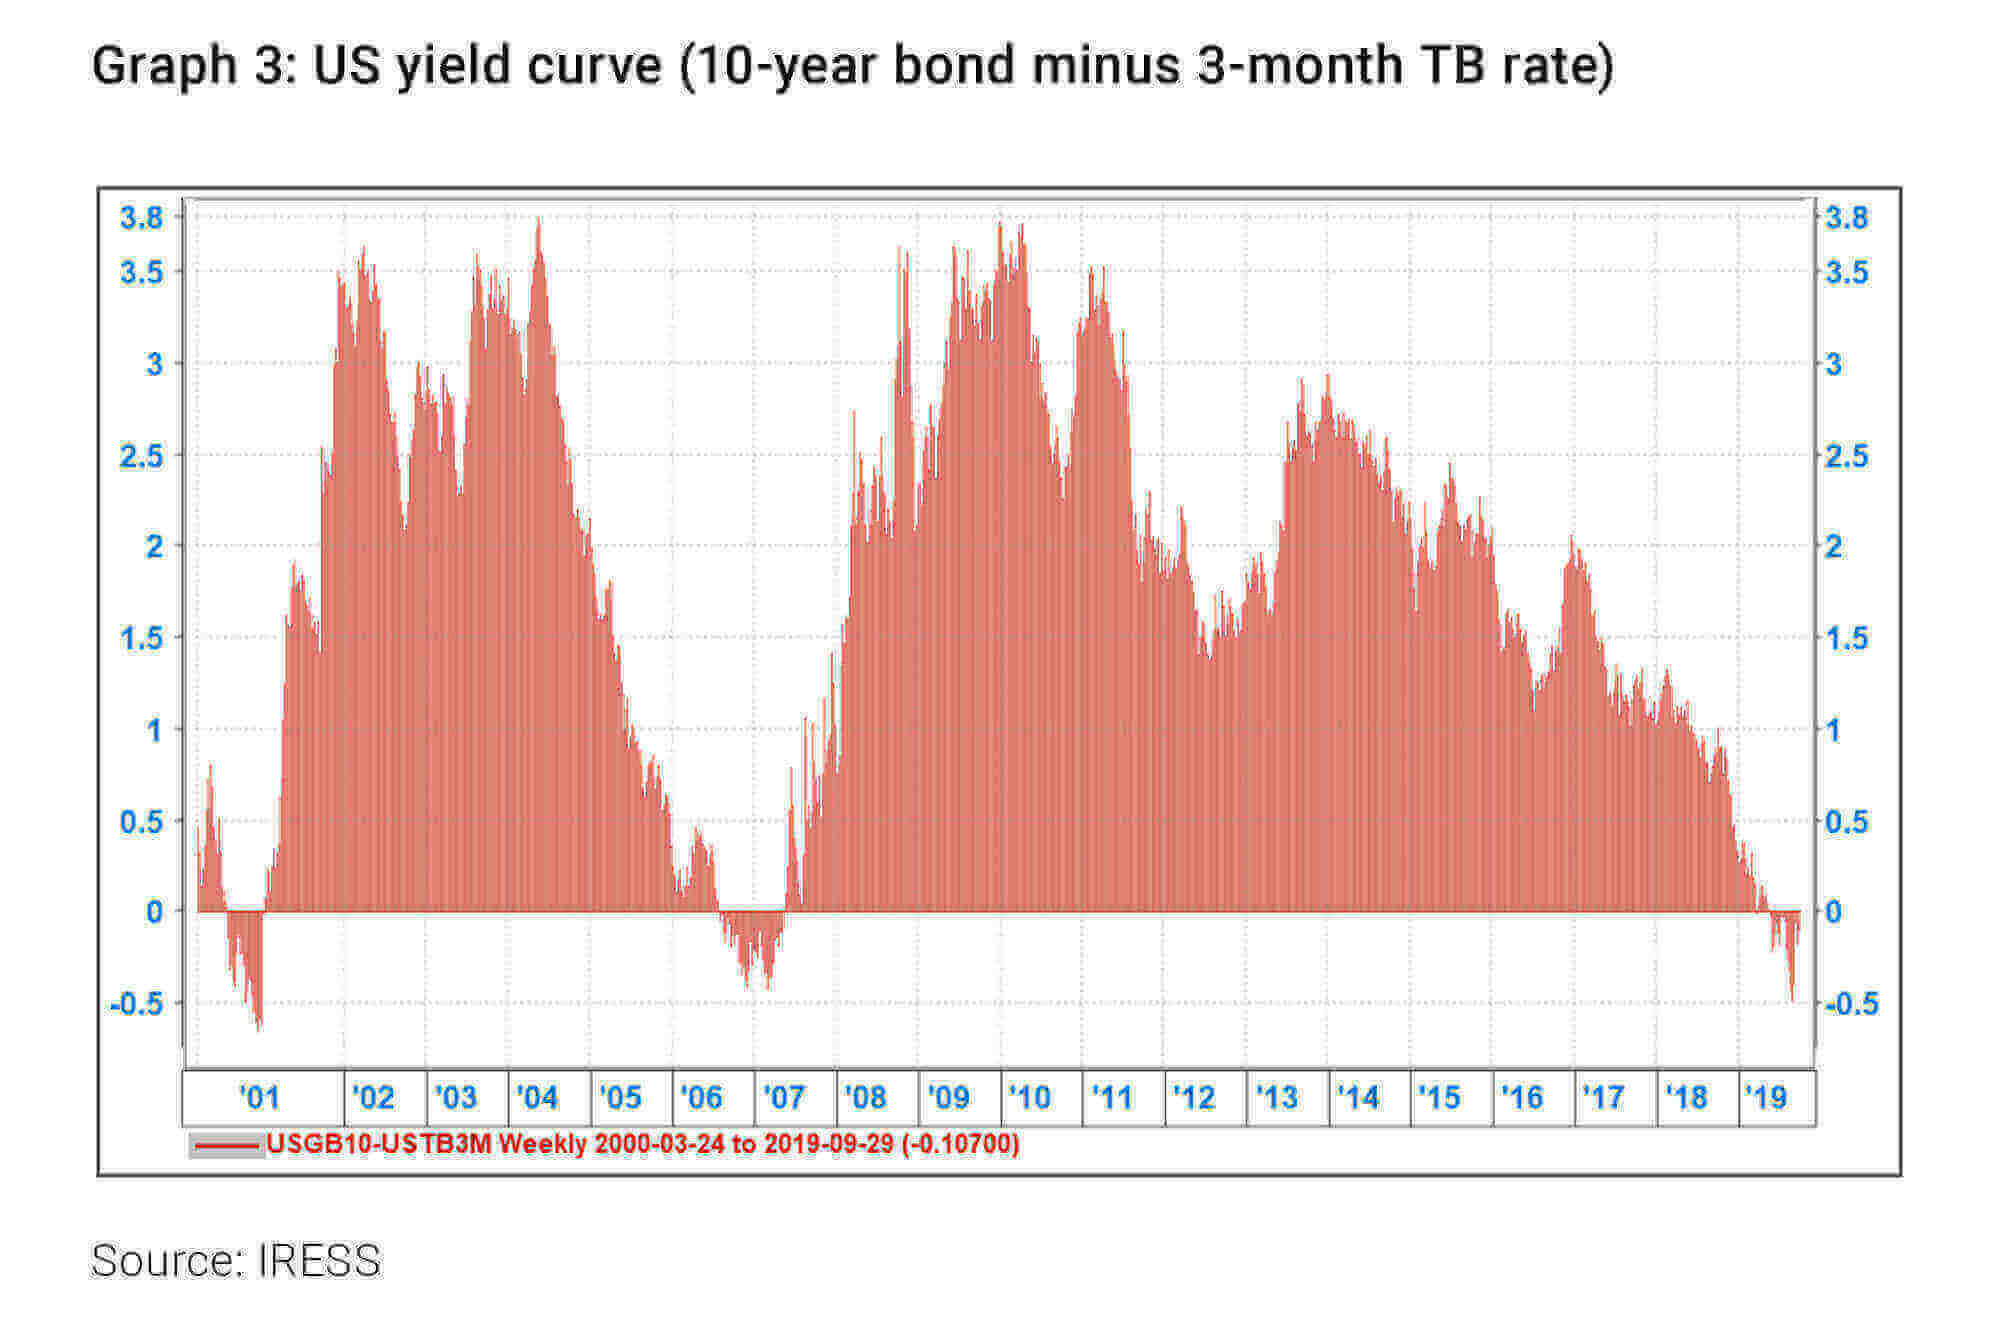 US yield curve (10-year bond minus 3-month TB rate) - Allan Gray